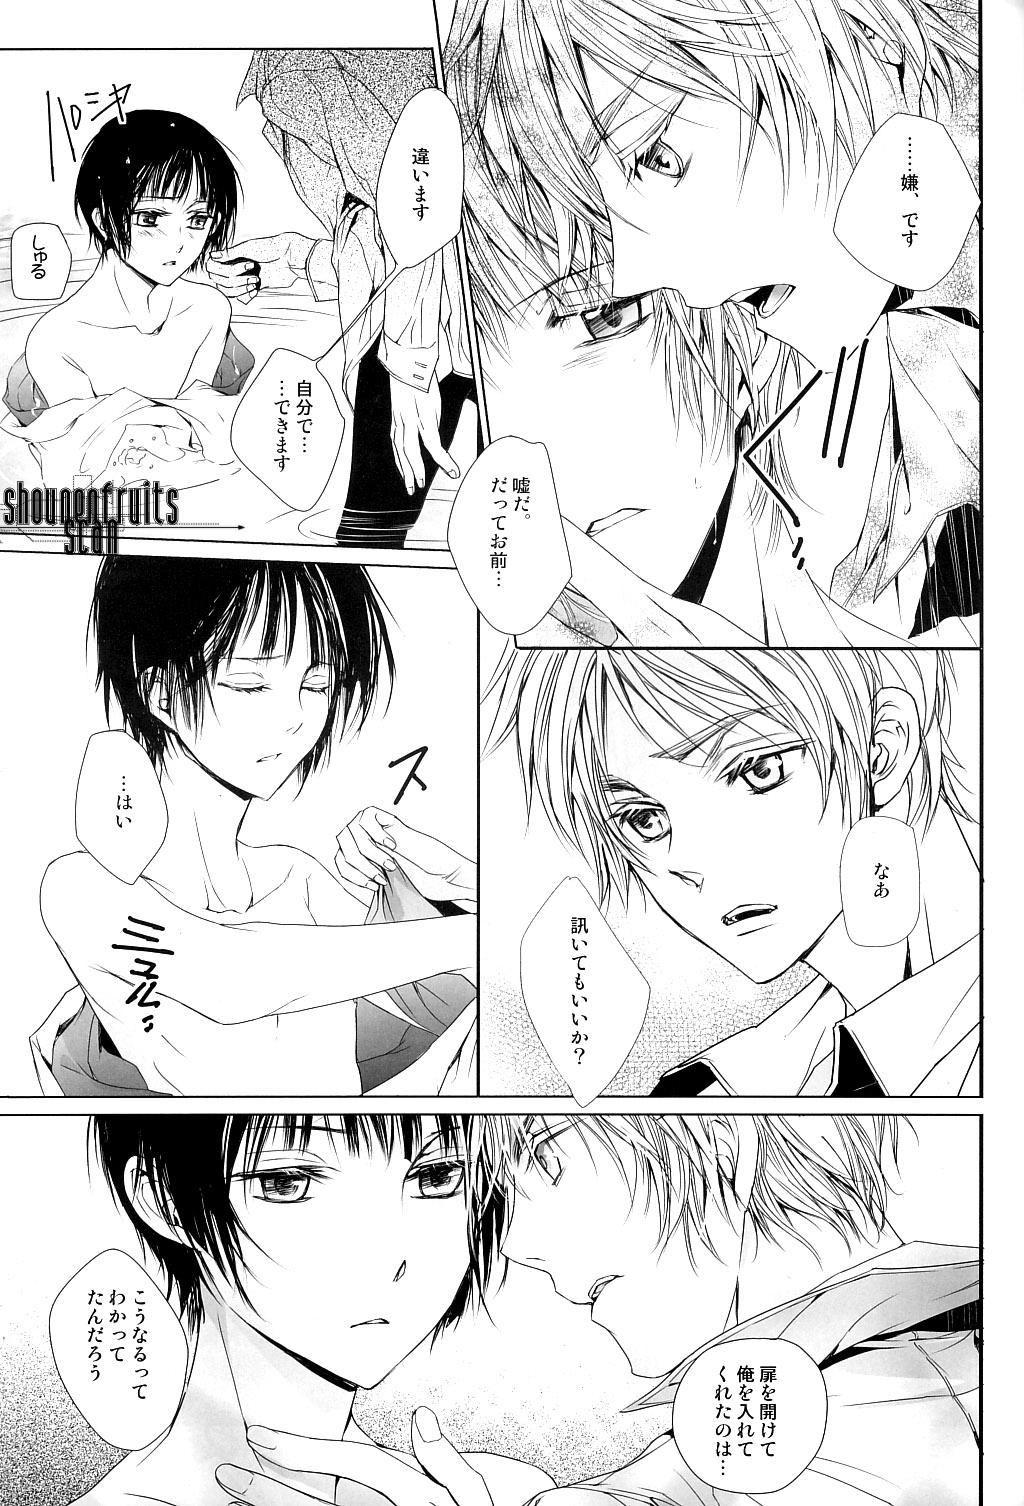 Gostoso Total Eclipse - Axis powers hetalia Shemale - Page 6